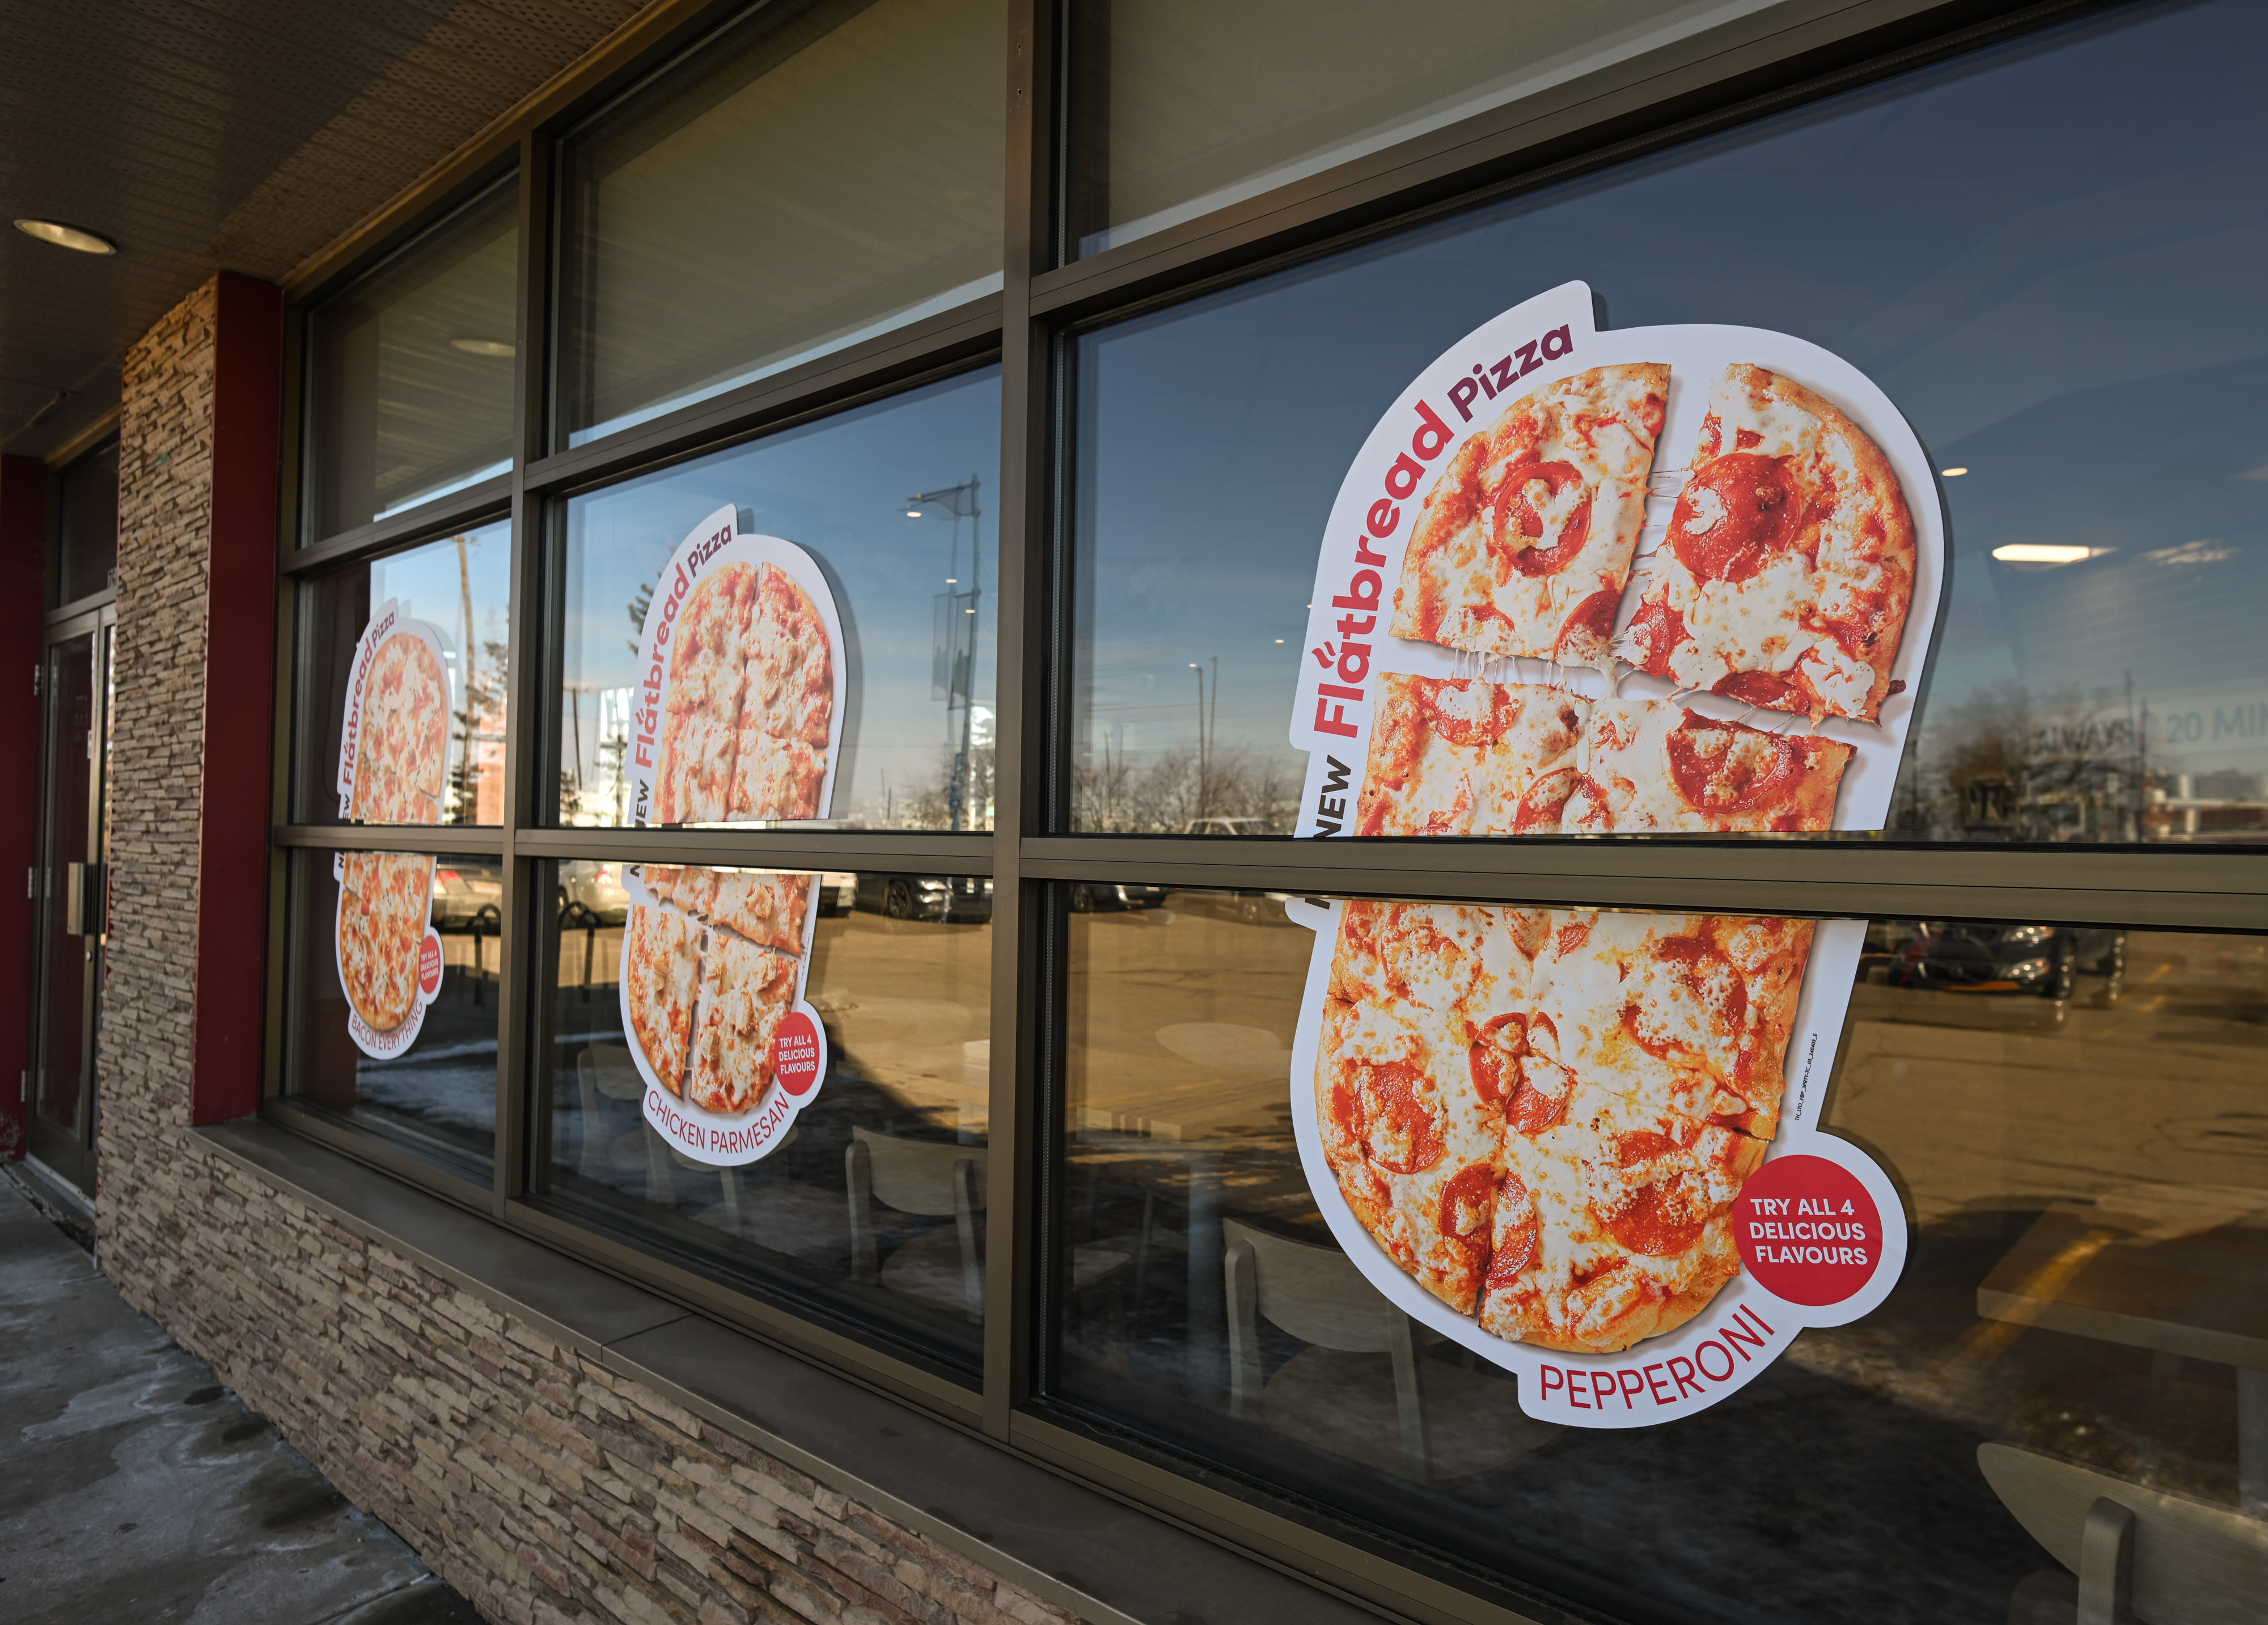 Tim Hortons sees more menu opportunity after pizza launch, thanks to high-speed ovens